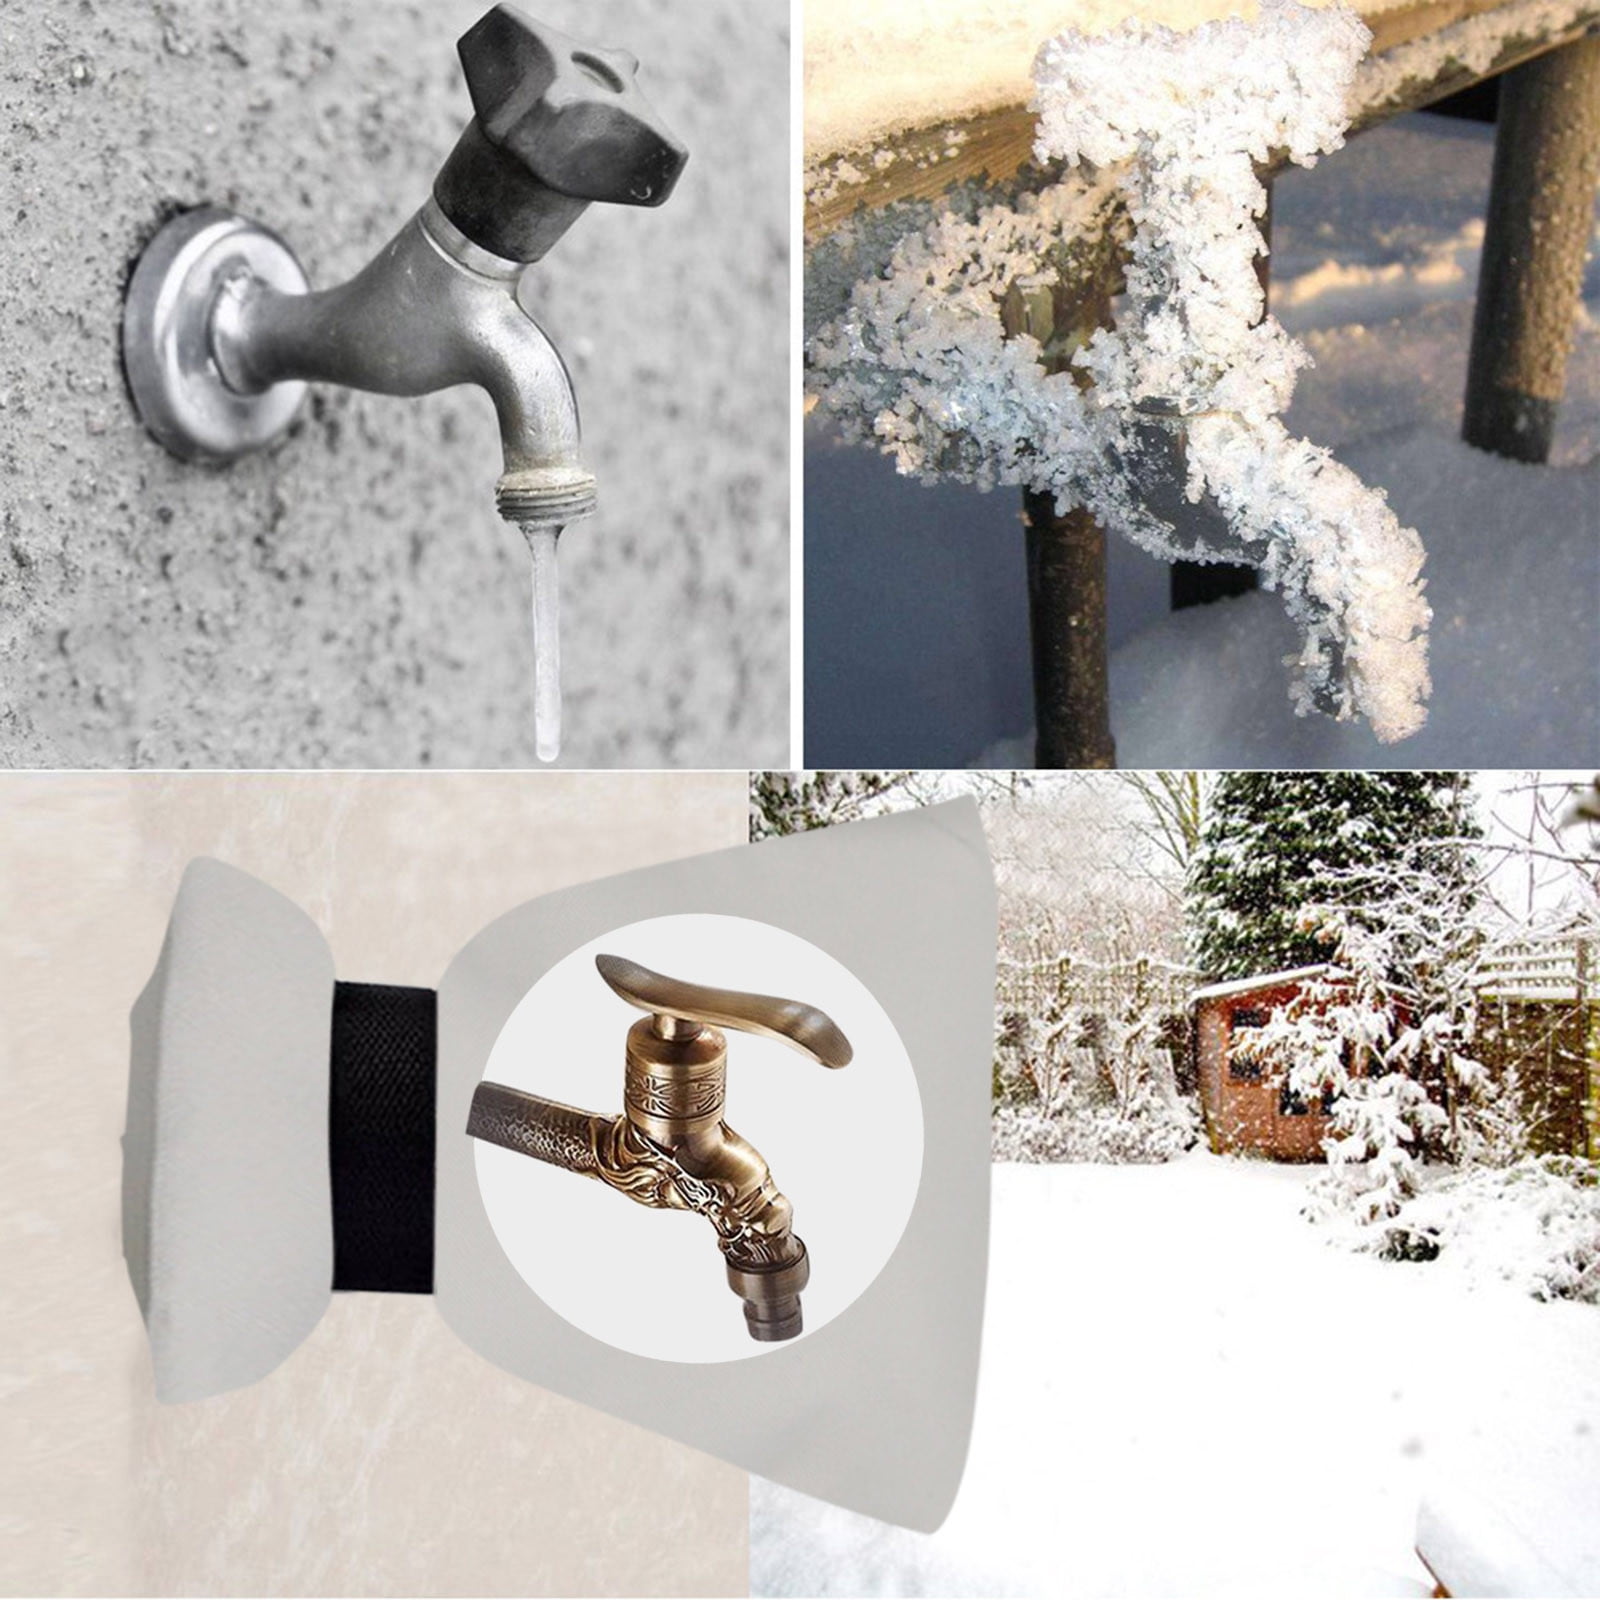 LTG Water Tap Protect Freezing Faucet Cover Winter Garden Taps Outside Insulated 